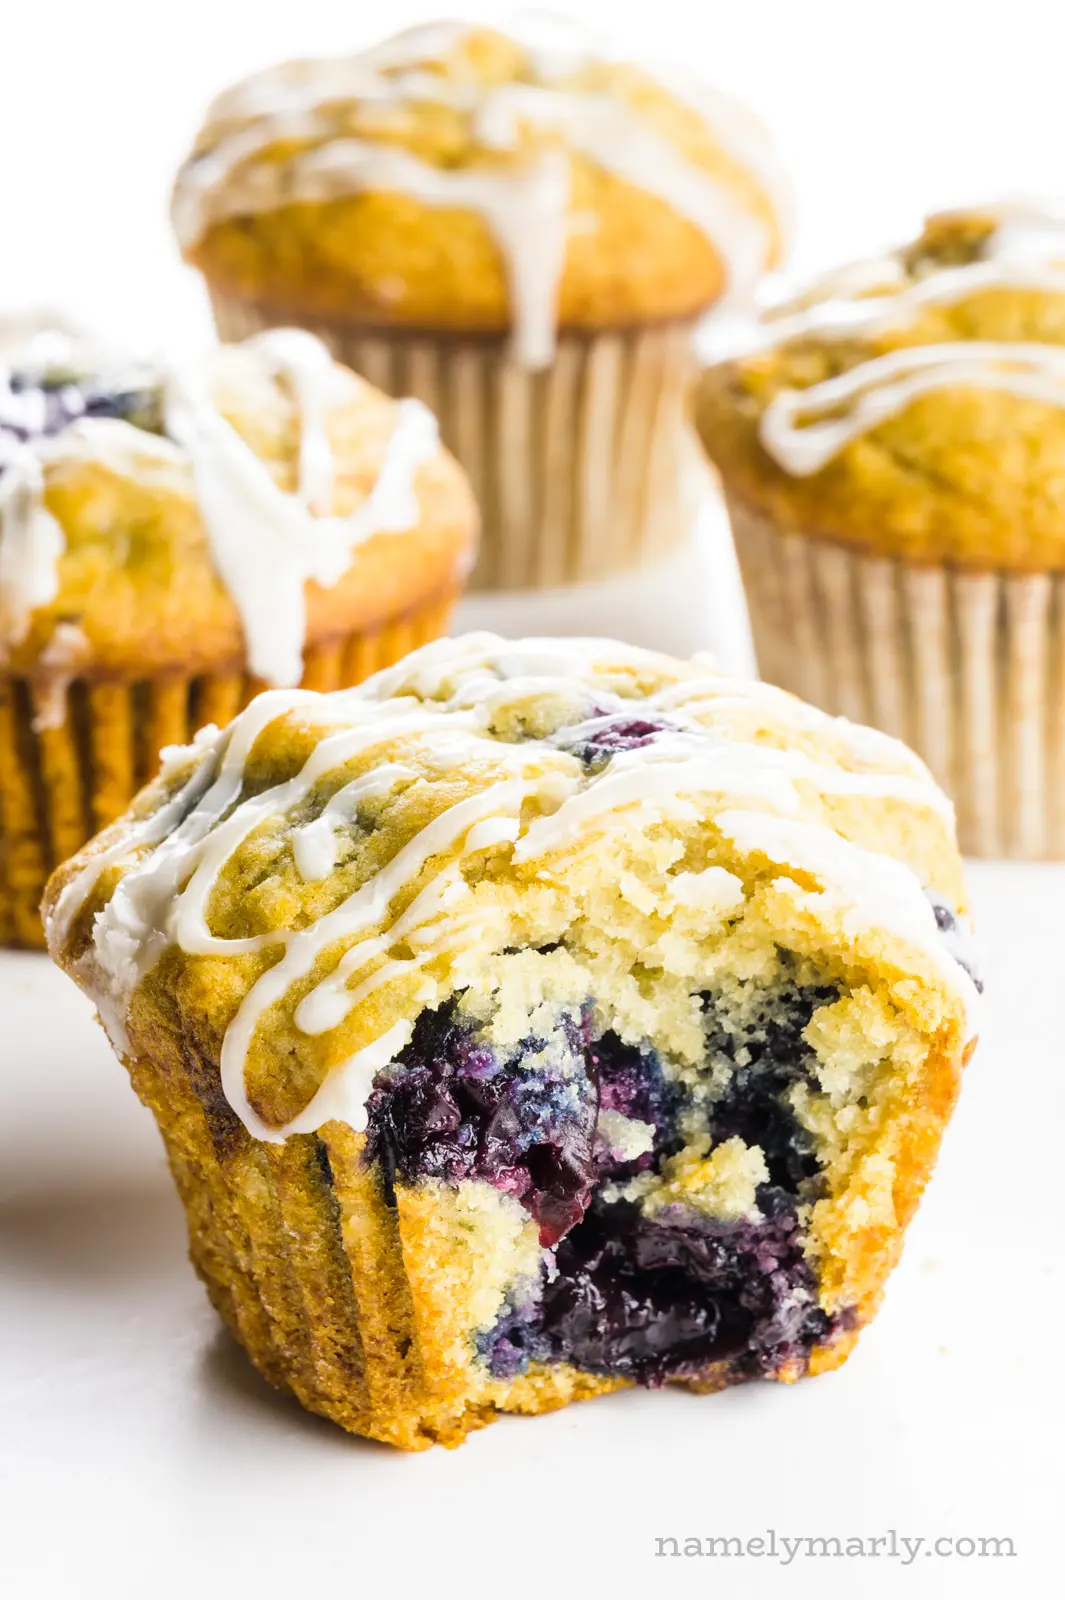 A cherry muffin with a bite taken out of it sits in front of three other muffins.